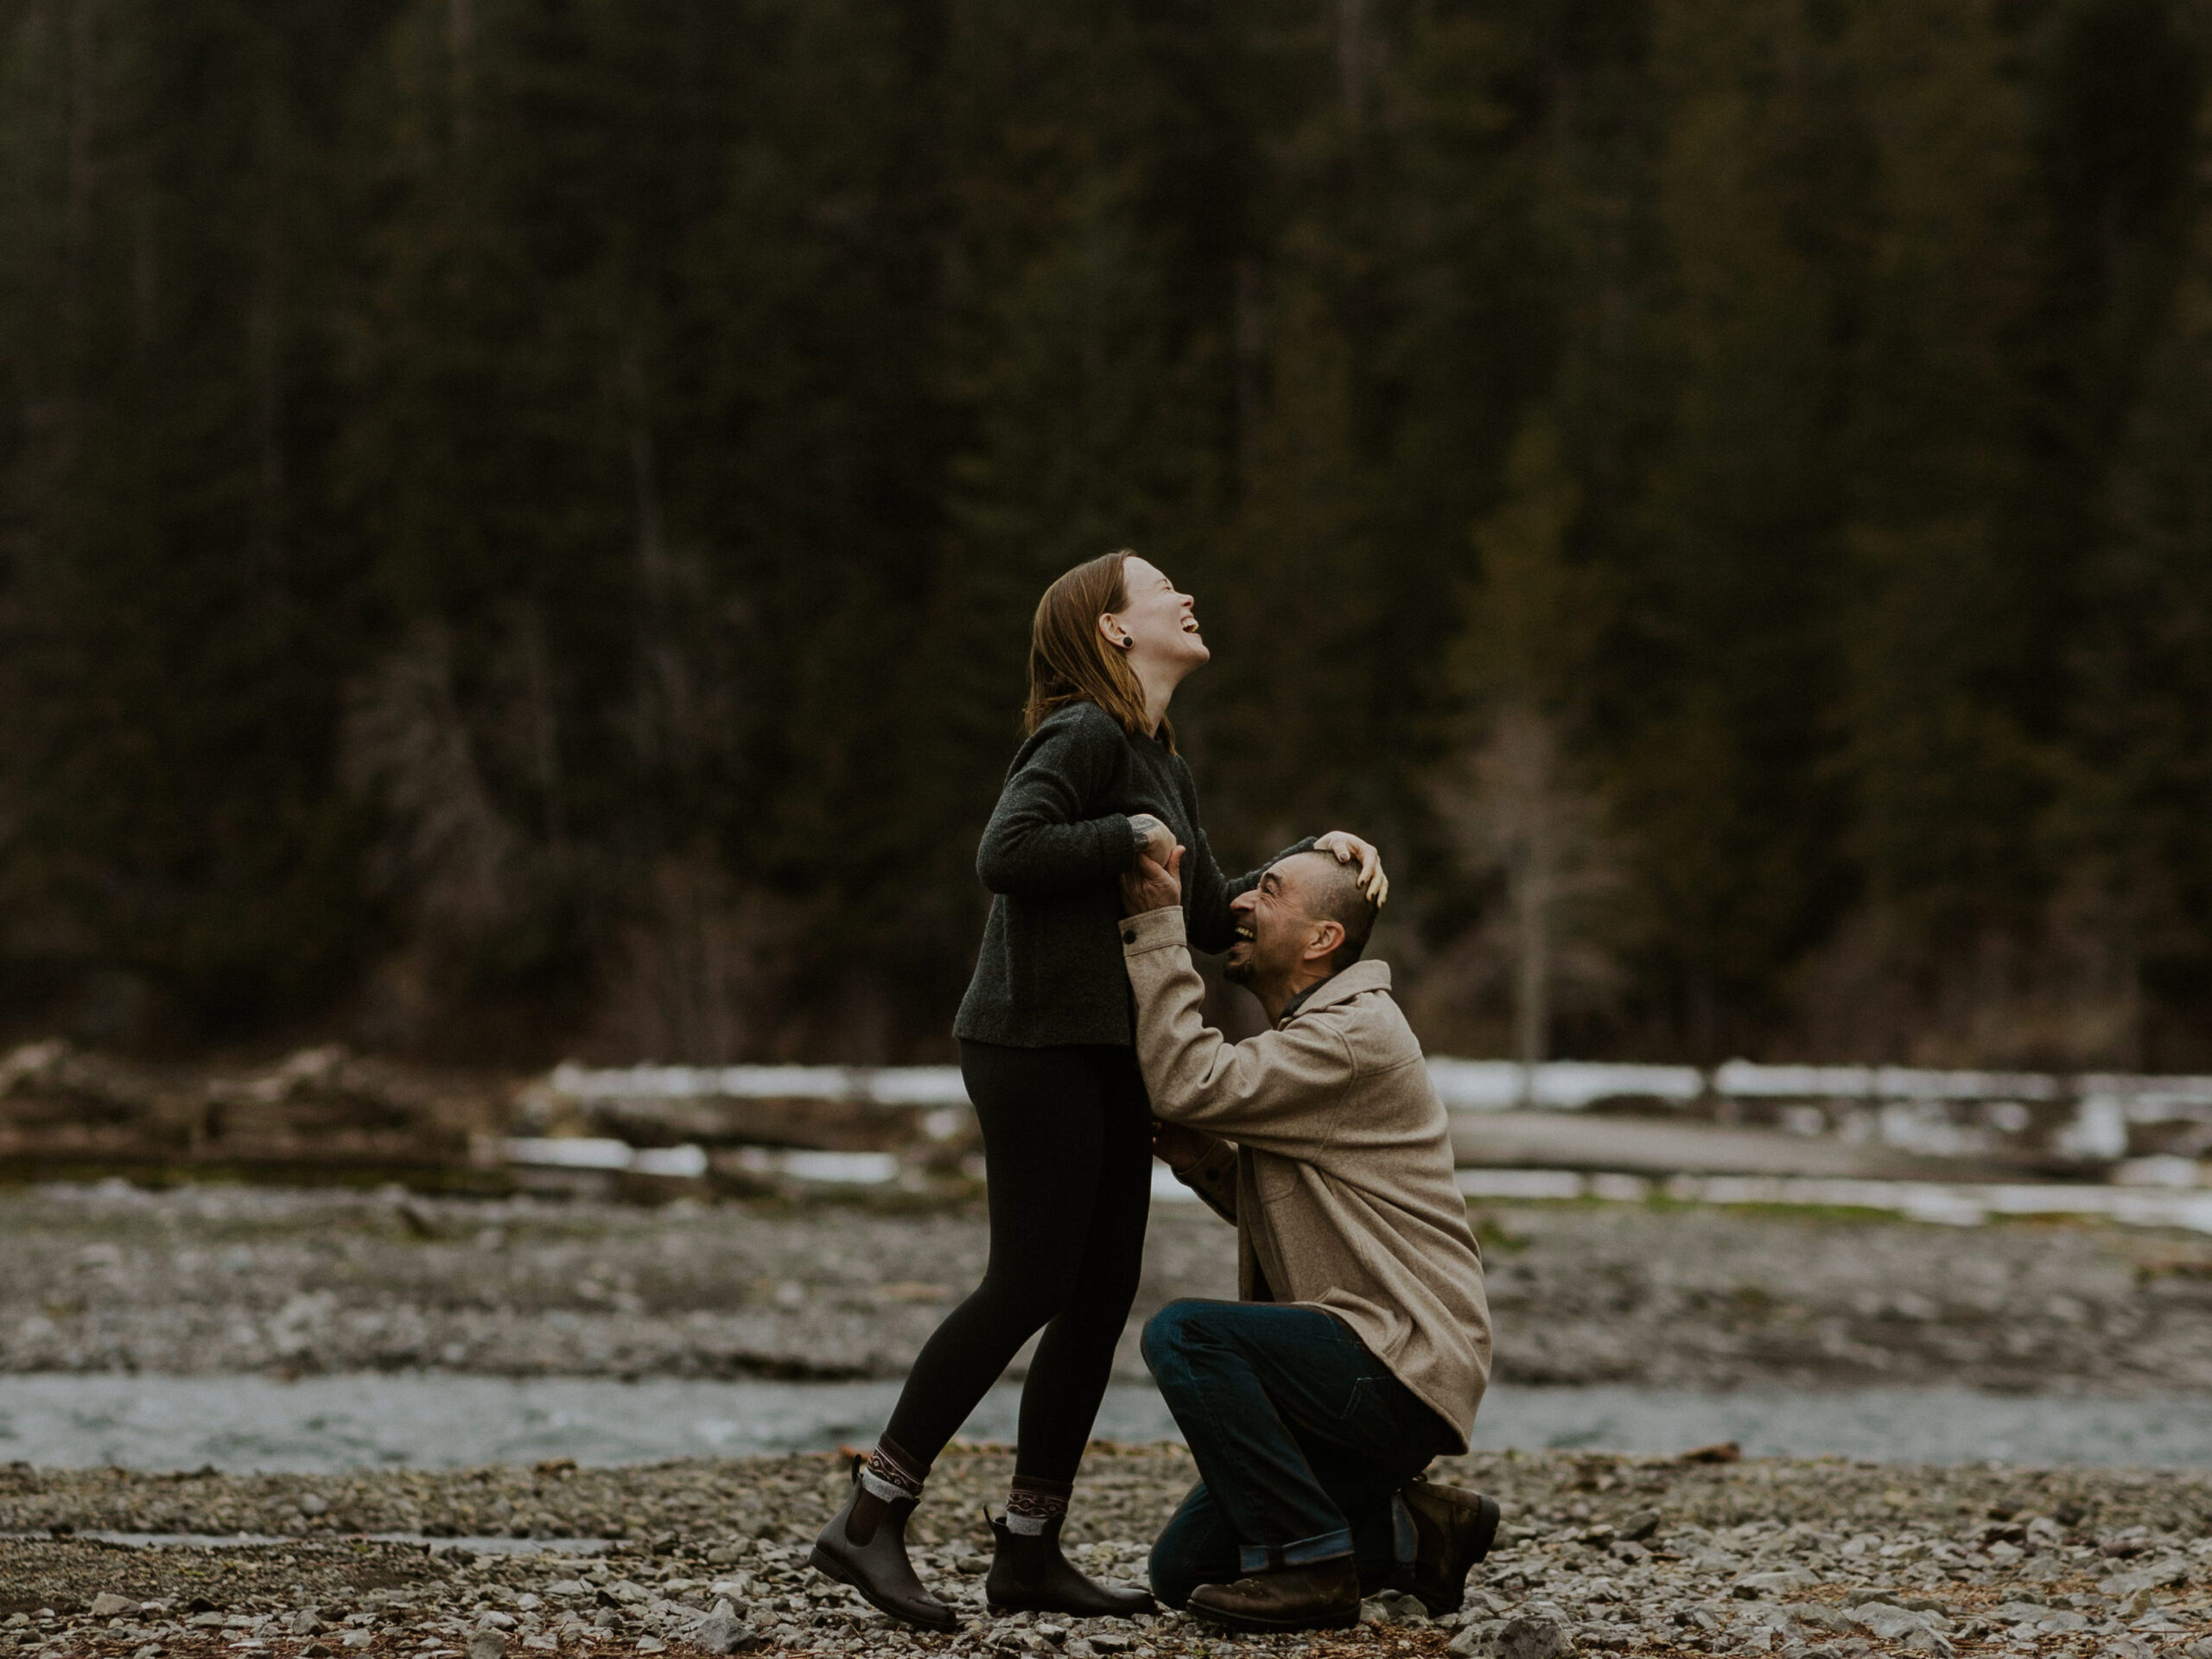 A couple embracing in the woods.